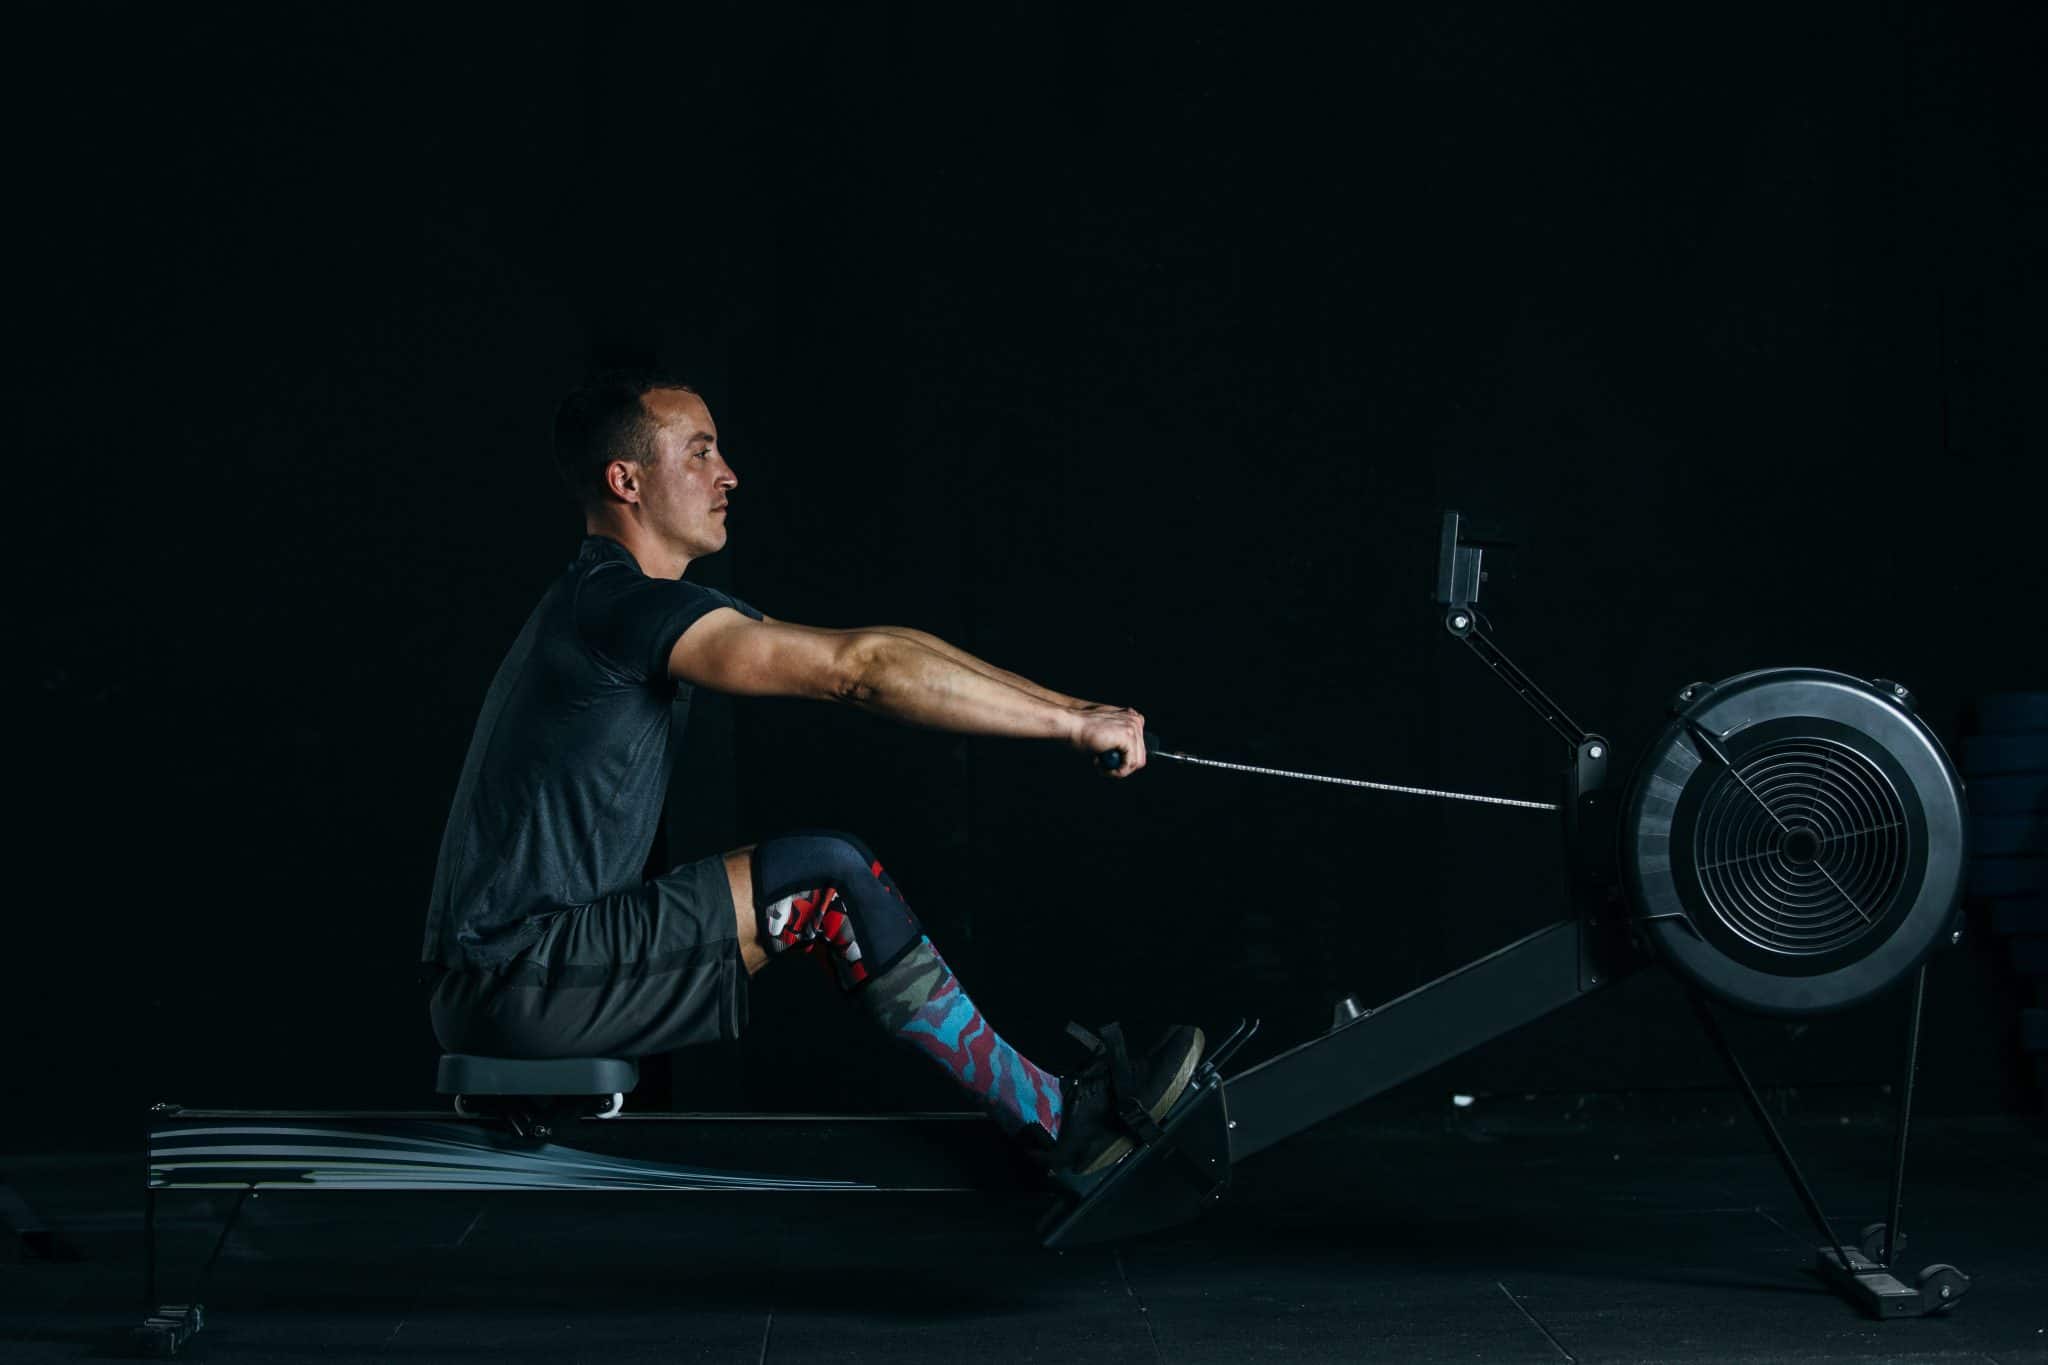 Rowing Machine vs Elliptical: Which Is Best For Exercise?